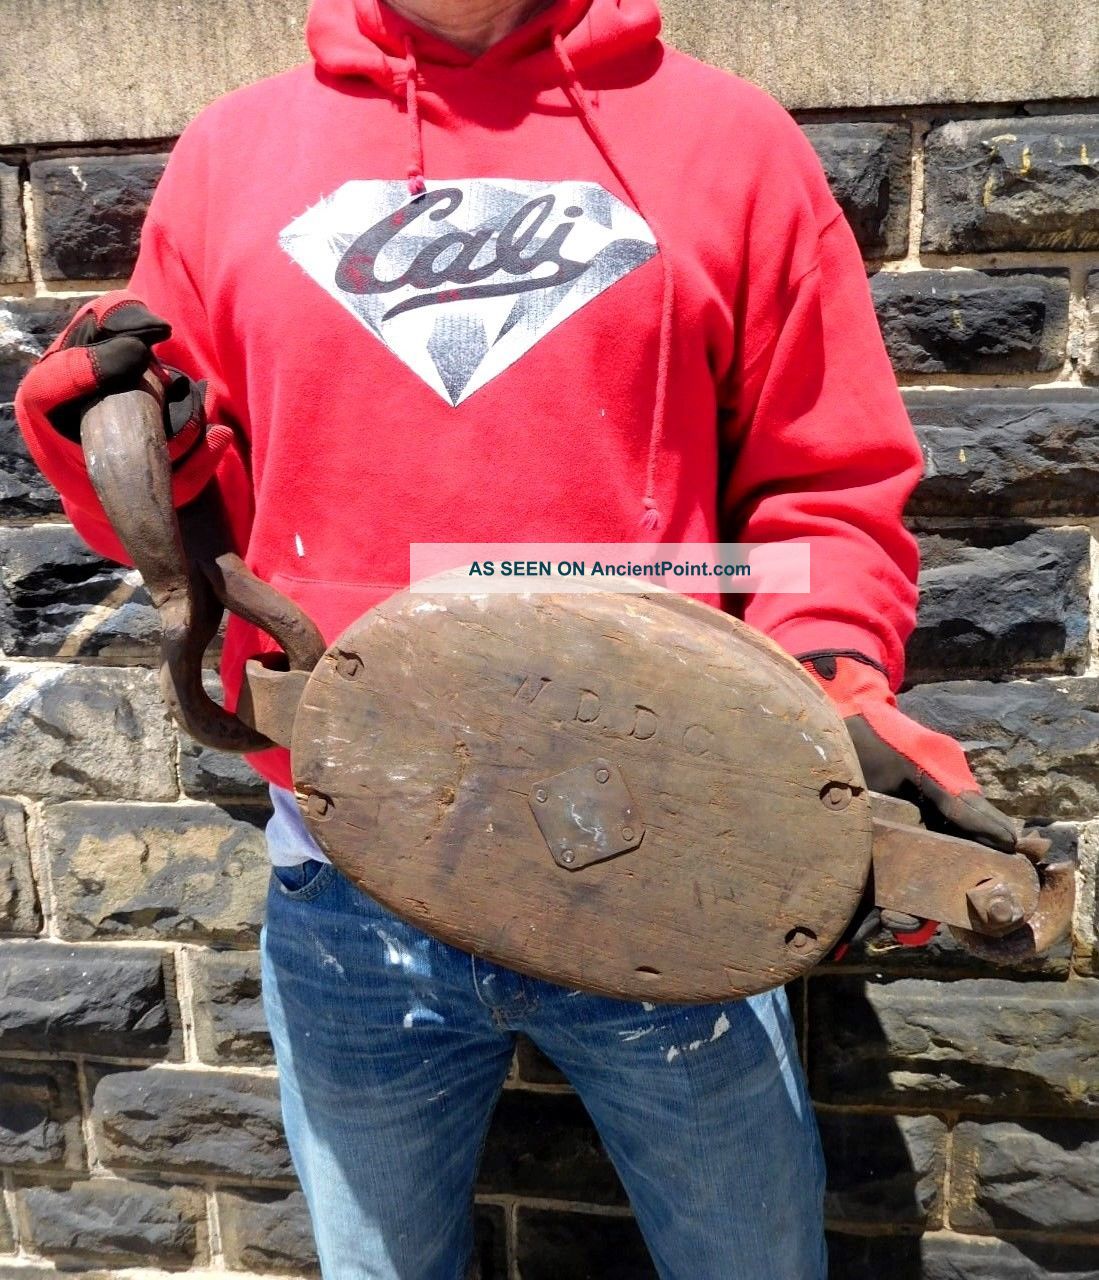 Vintage Giant Block And Tackle Overall 25 